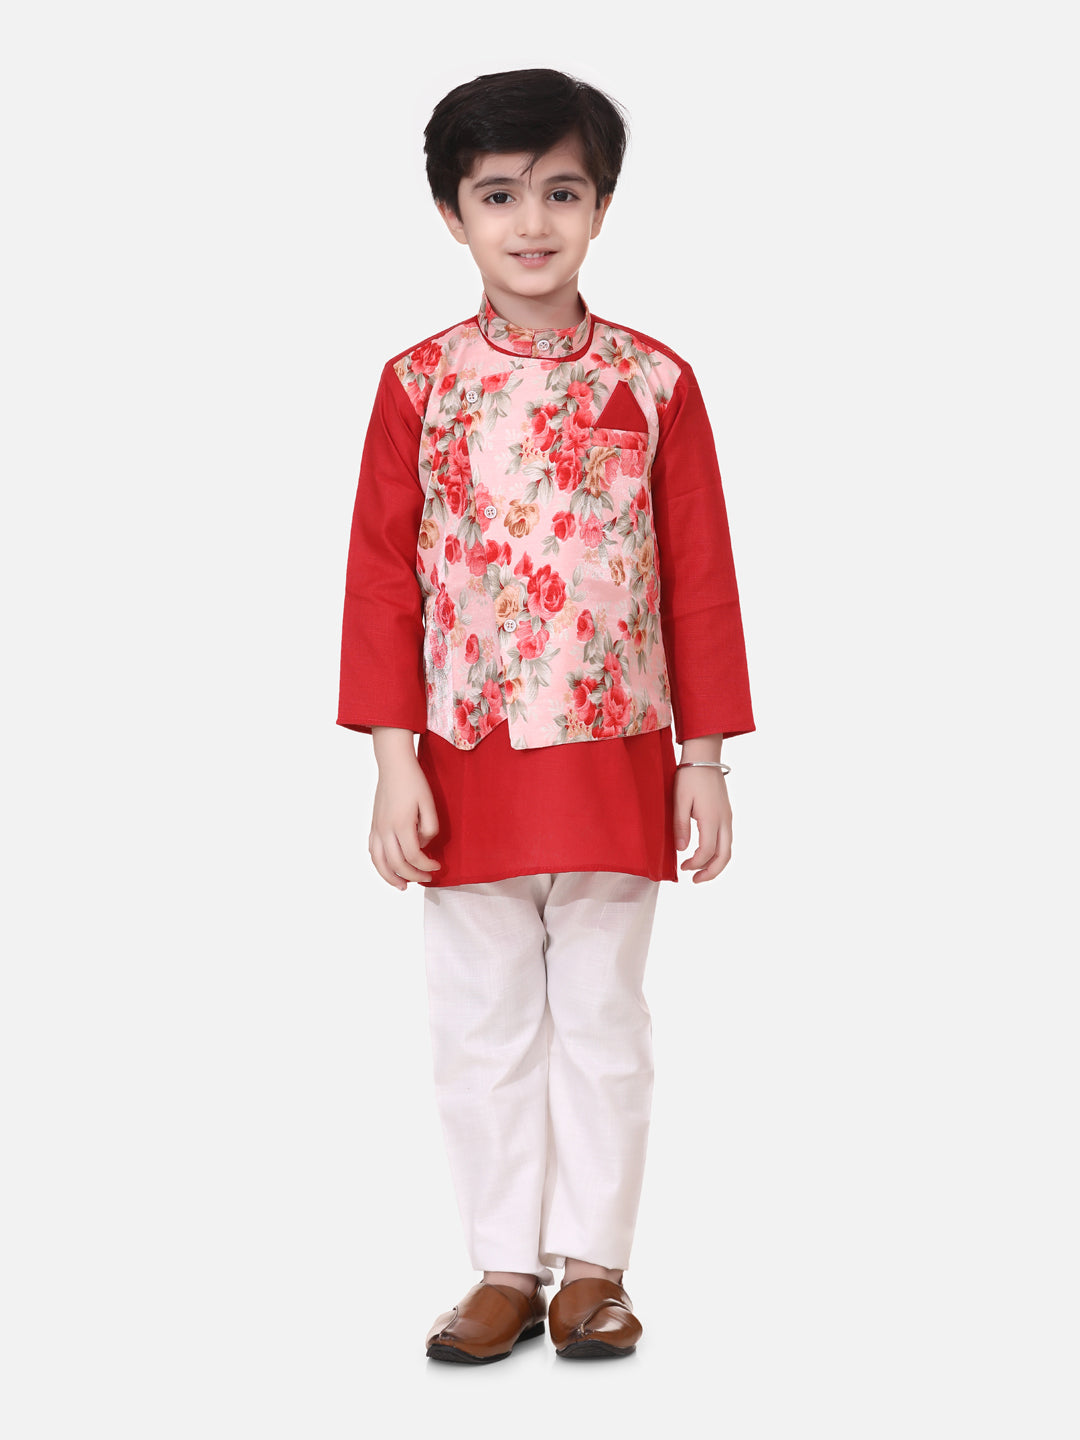 BownBee Full Sleeves Kurta With Attached Flower Printed Jacket and Pajama Sets - Red